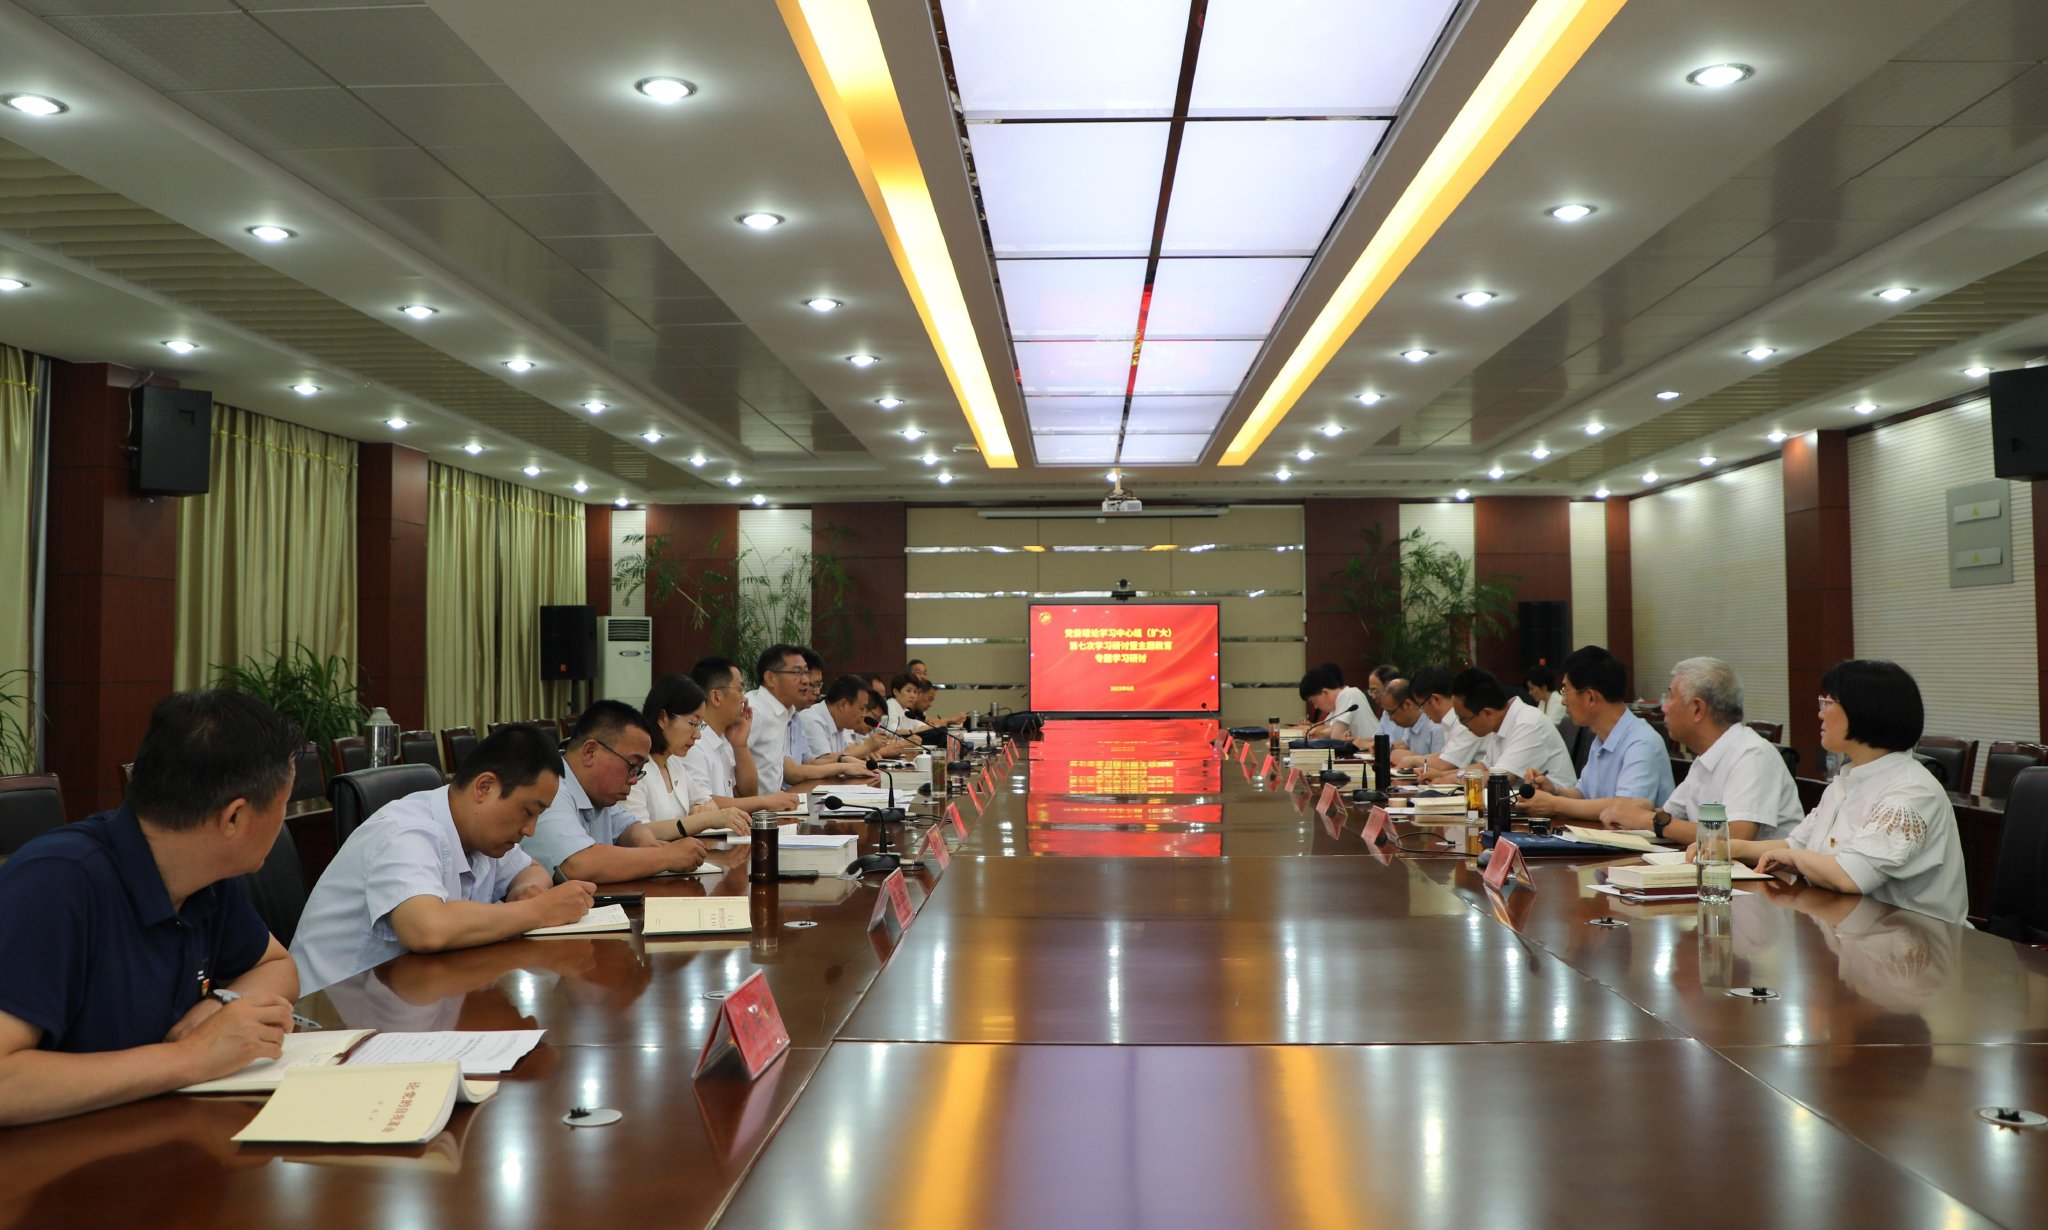  Theme education | Shandong Vocational College of Economics and Trade holds theme education reading class